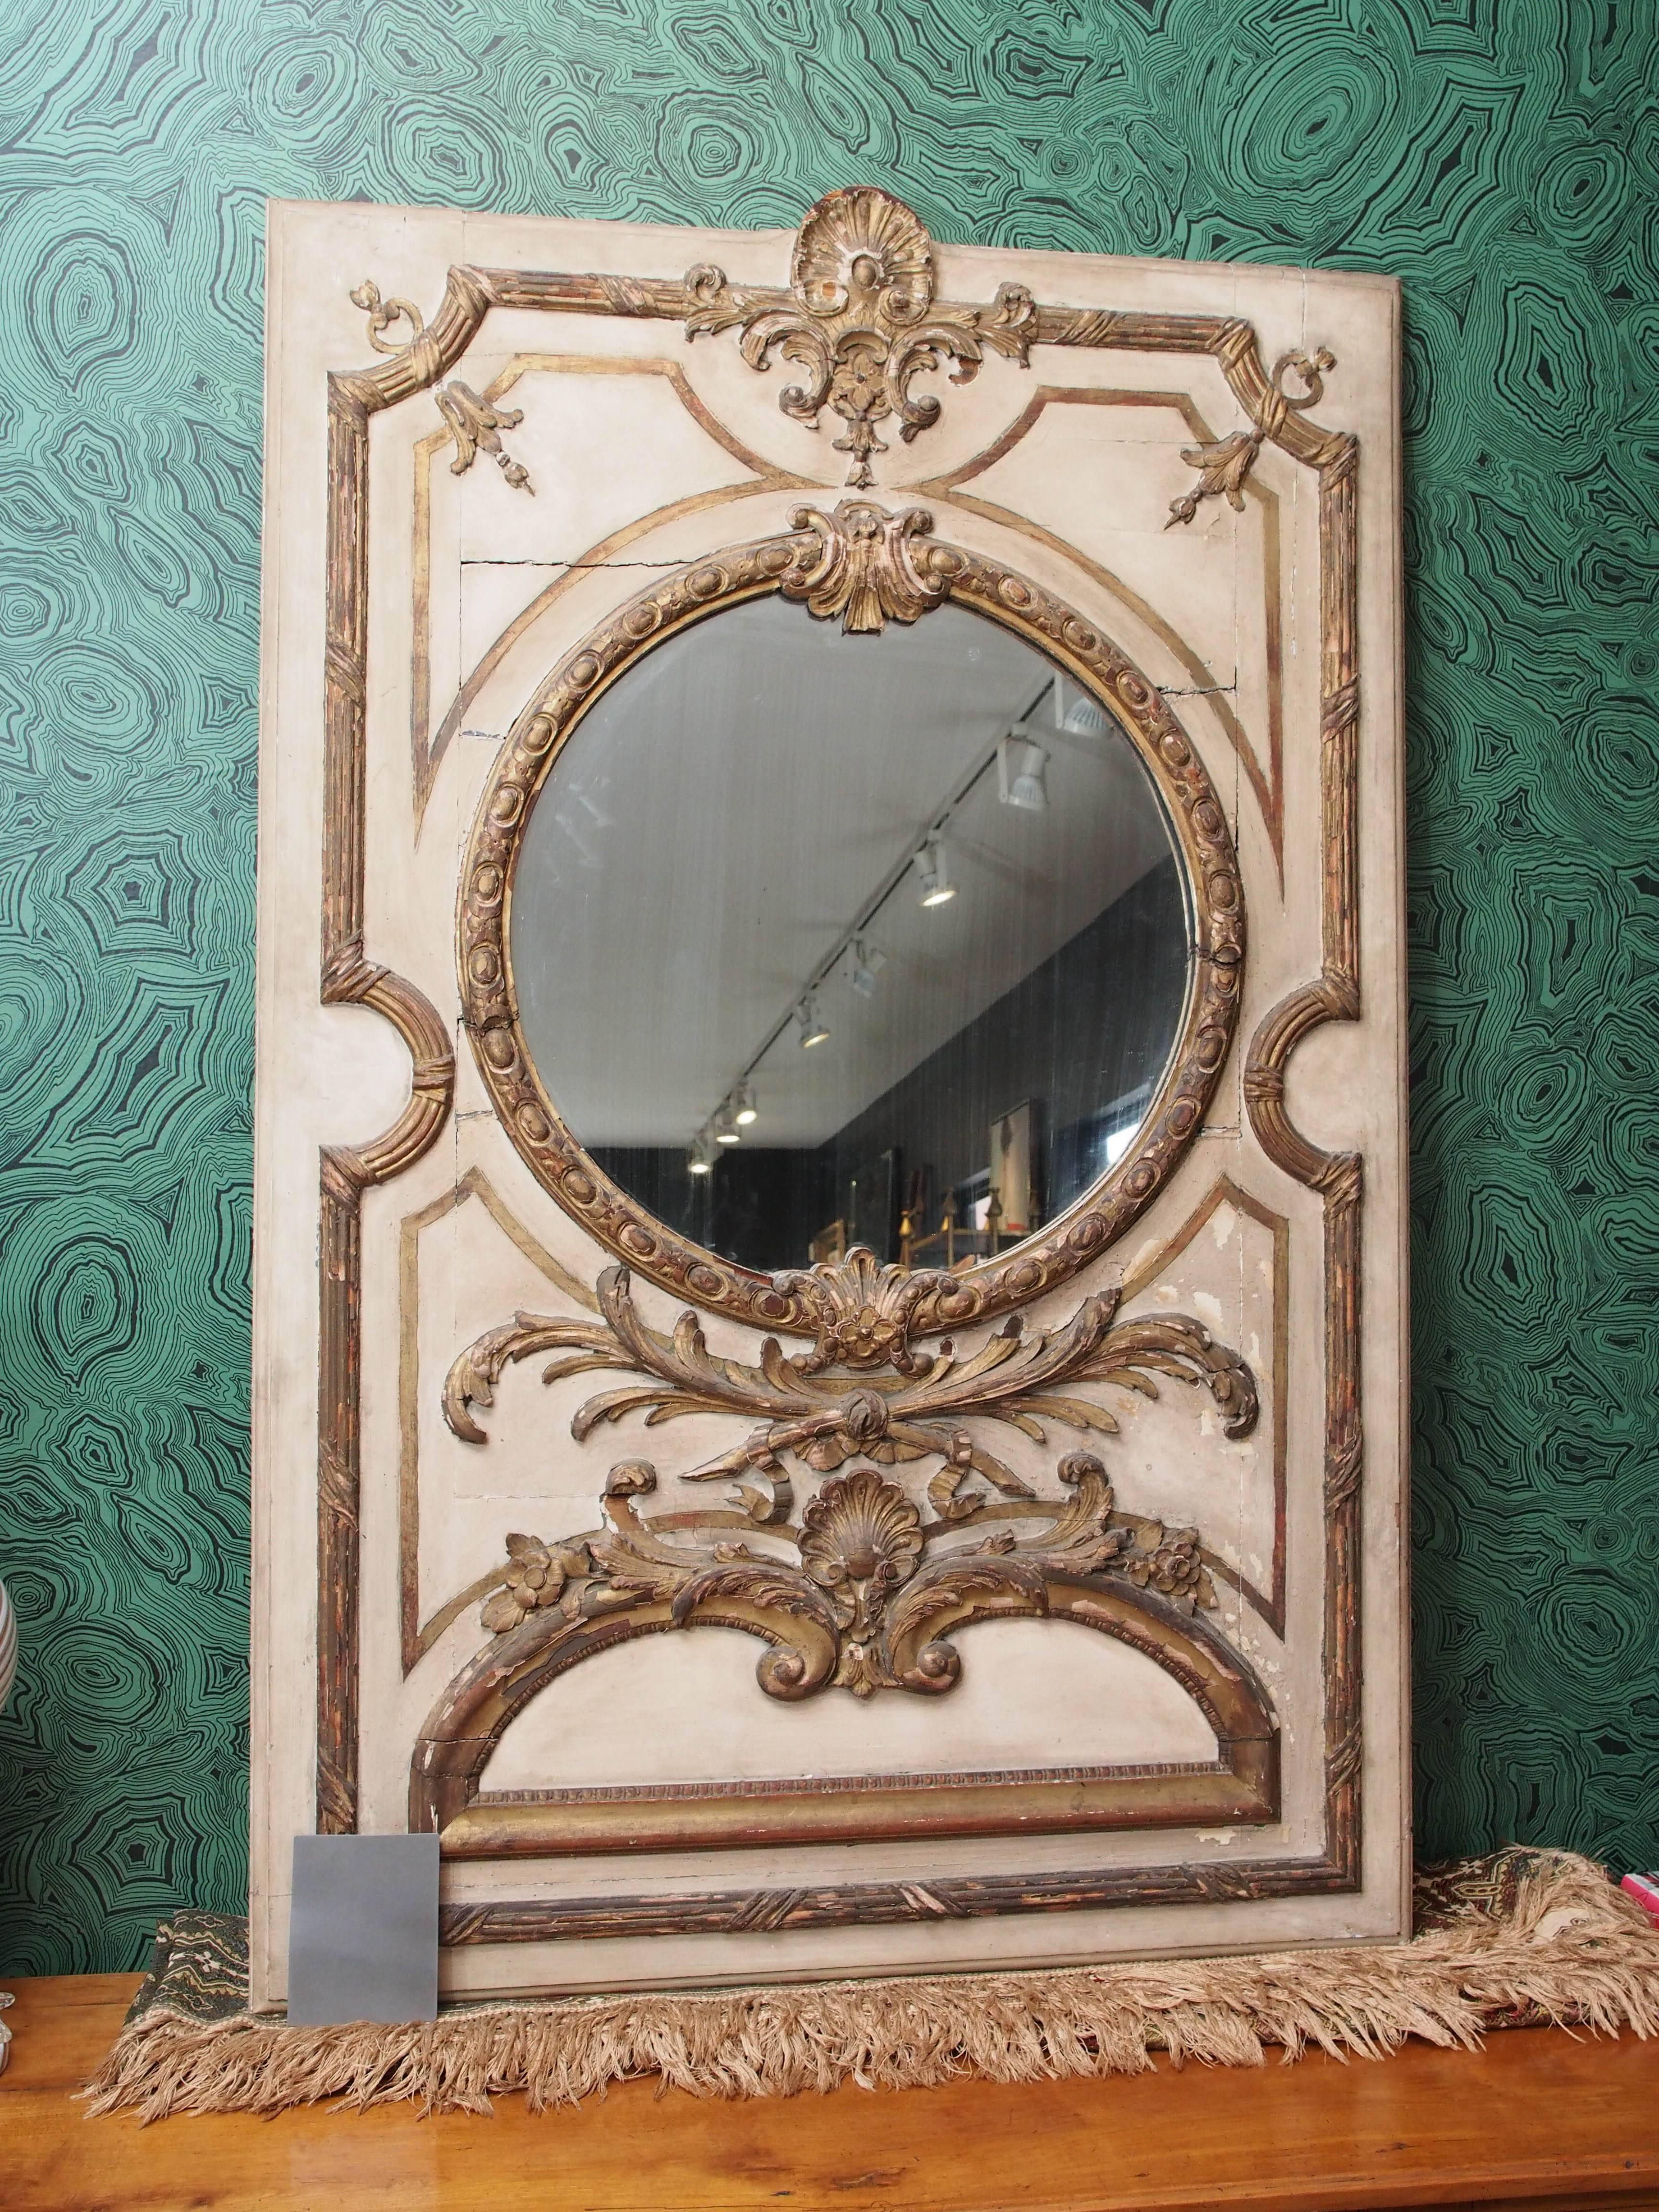 Beautiful trumeau mirror with carved accents. Cream and gold.